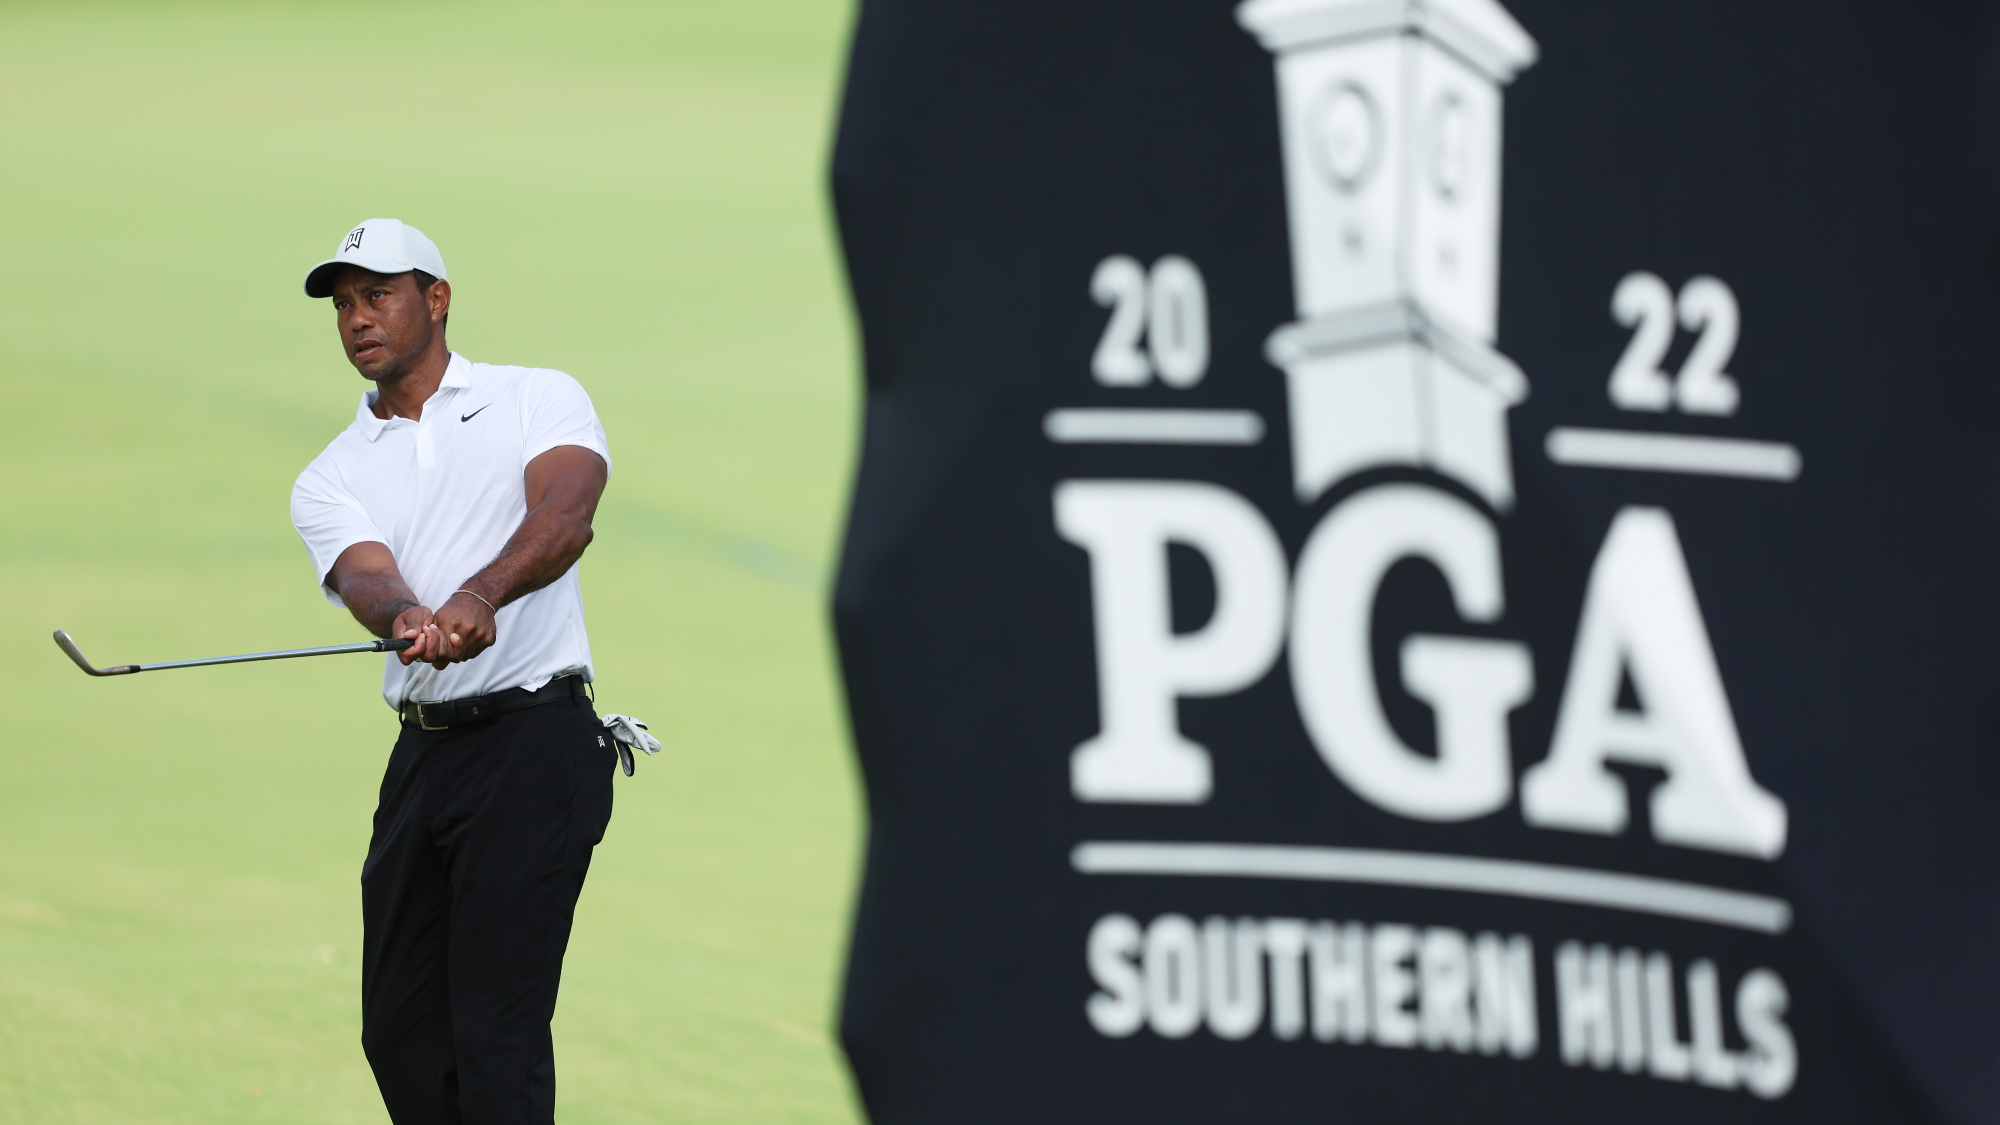 PGA Championship 2022 live stream how to watch online from anywhere, on TV and without cable